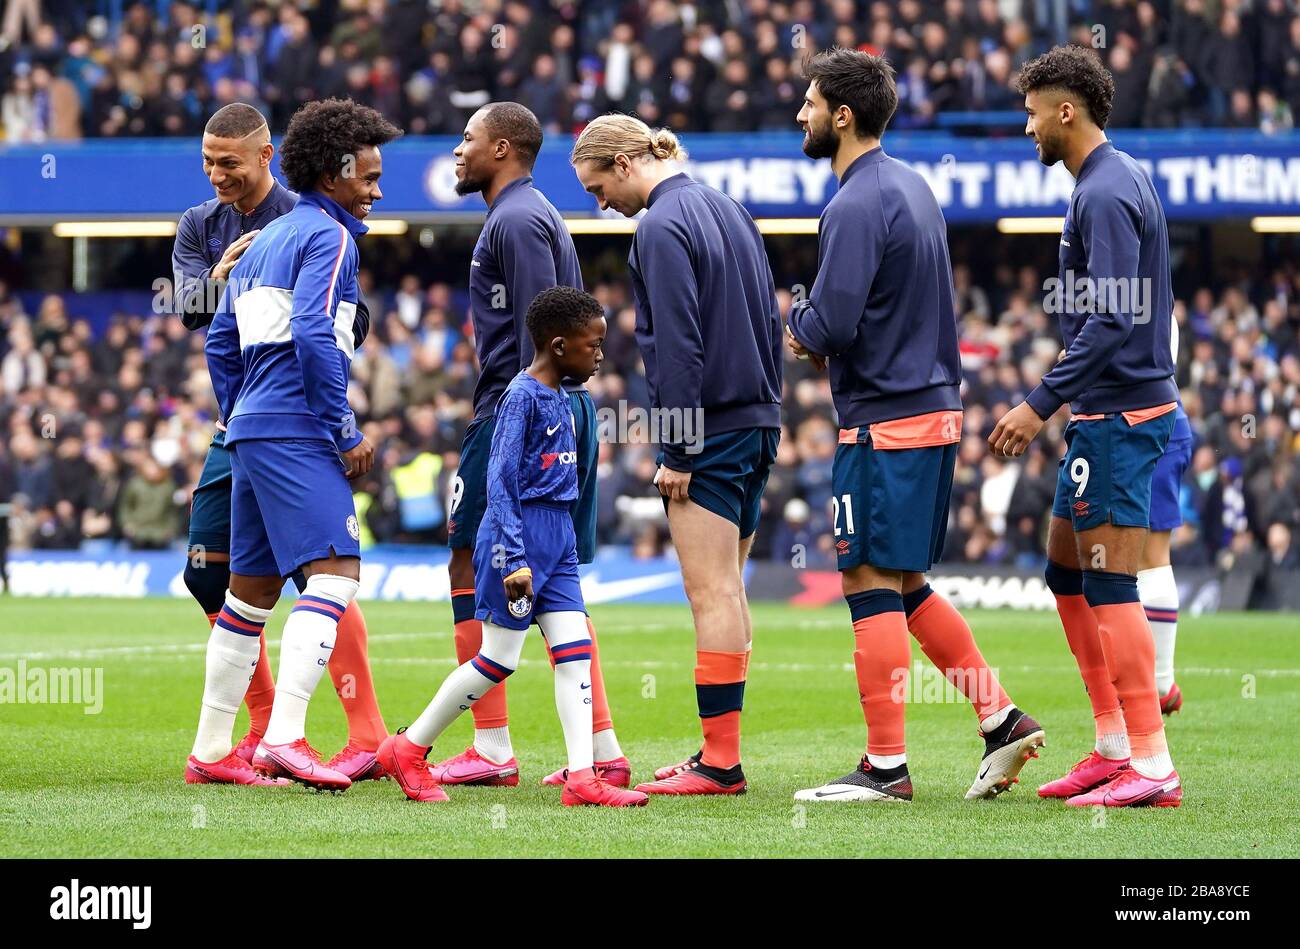 Chelsea and Everton players walk past each other trying to avoid handshakes prior to kick-off Stock Photo